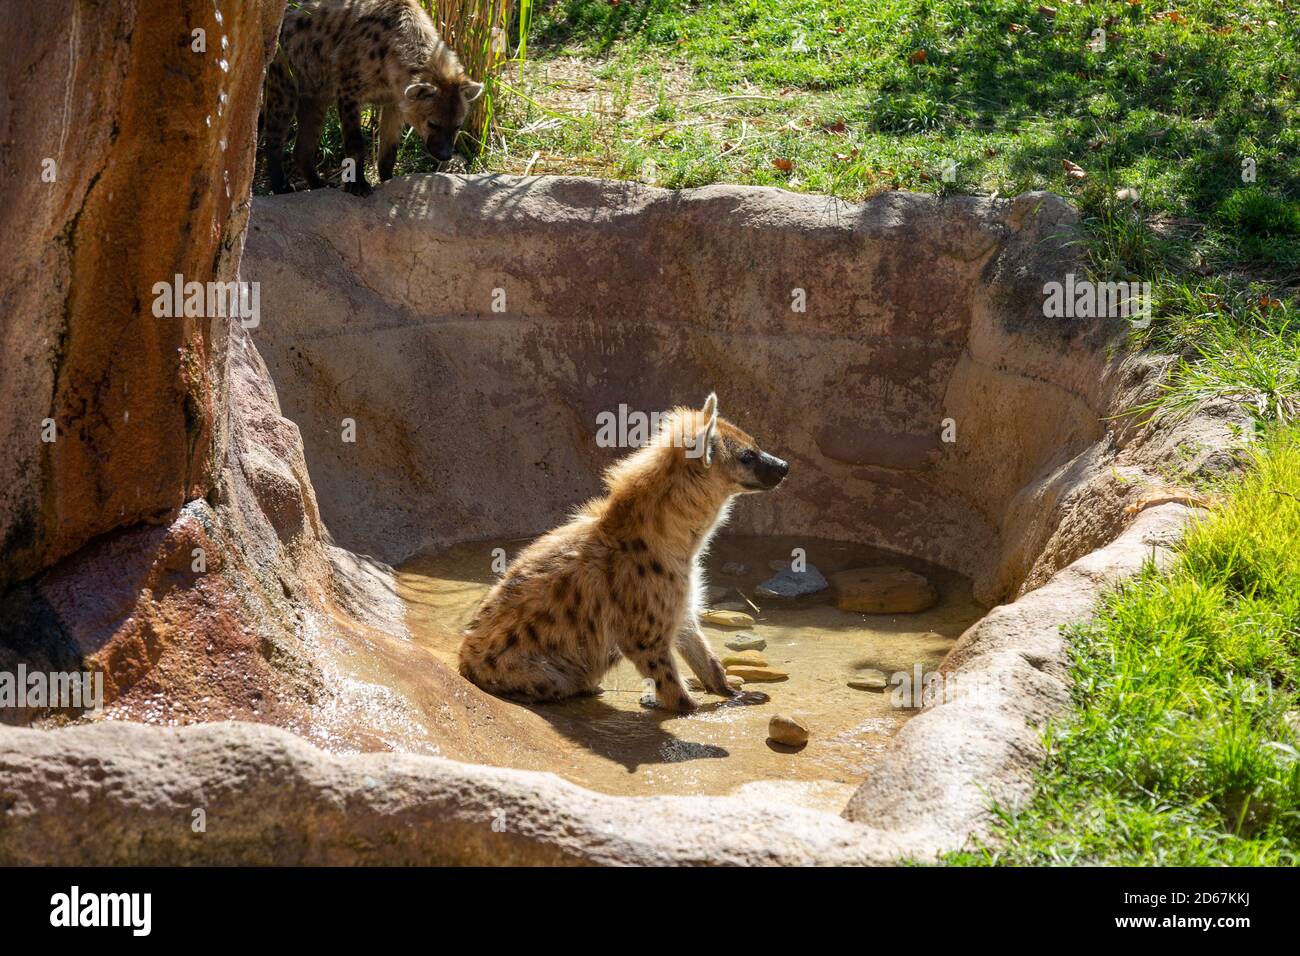 A hyena looks down on another in their exhibit at the Fort Wayne Children's Zoo in Fort Wayne, Indiana, USA. Stock Photo